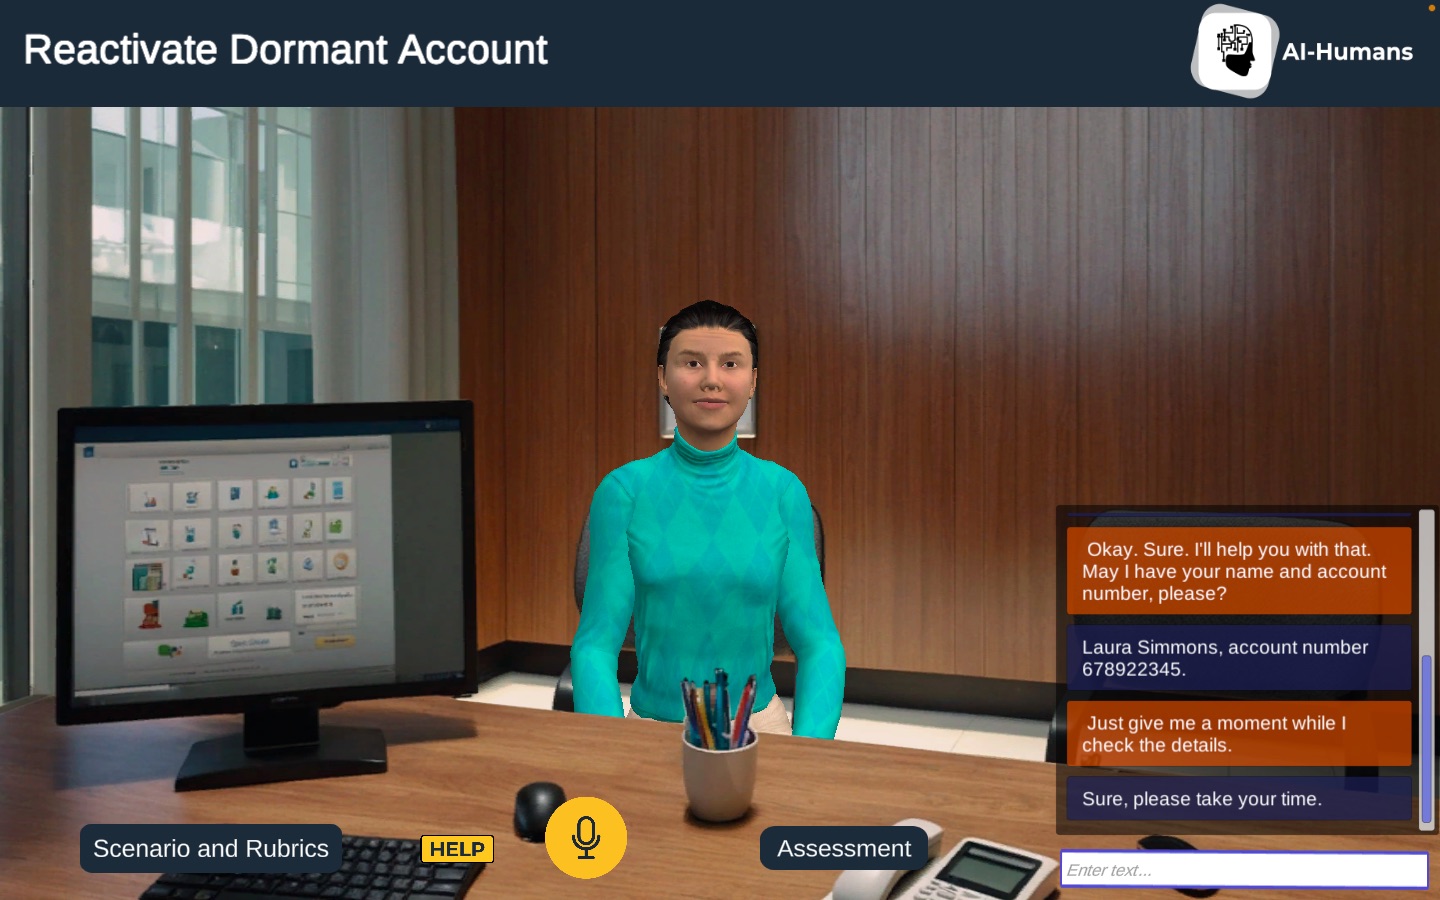 Training with AI-Humans to practice helping a client reactivate dormant account